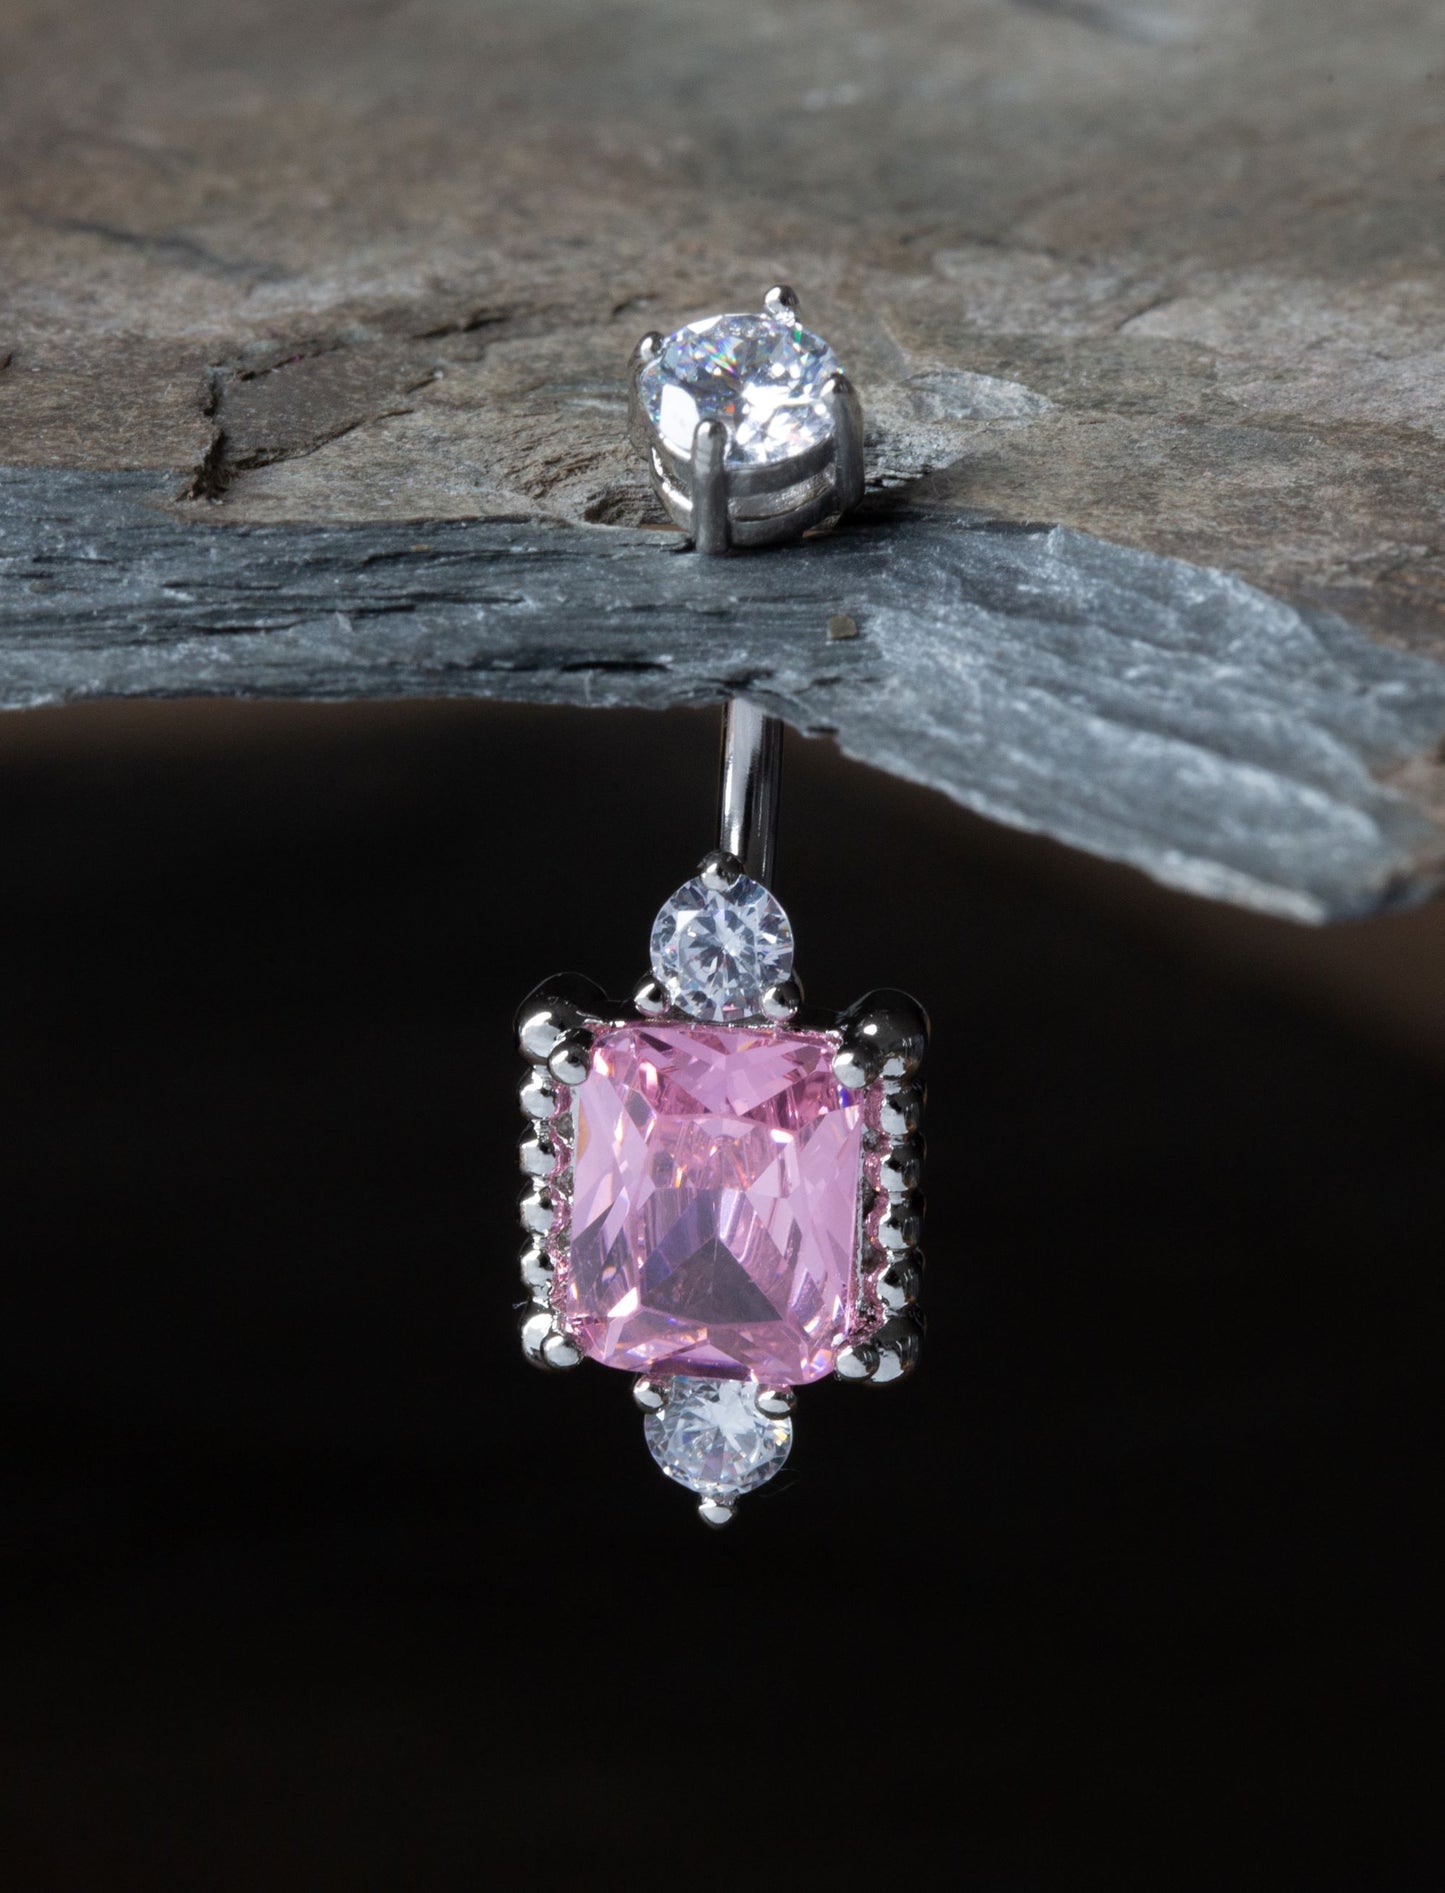 Pink CZ Crystal Princess Mirror Belly Button Ring - Stainless Steel